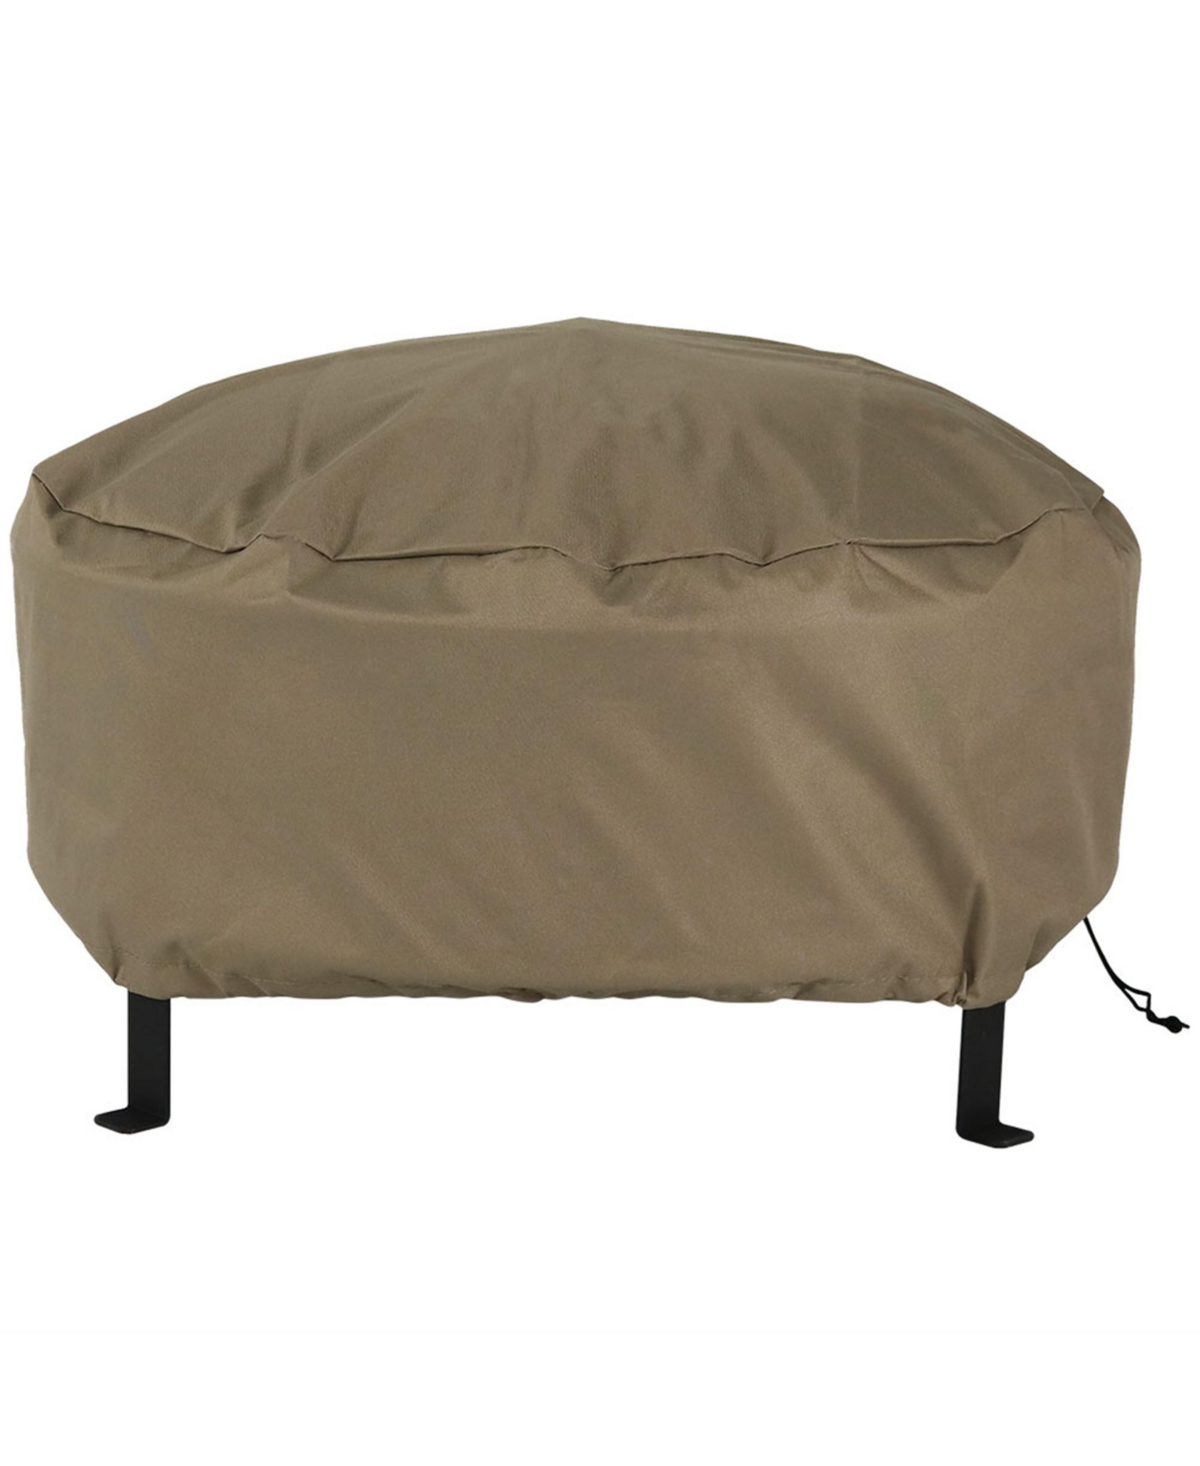 30 in Heavy-Duty Polyester Round Outdoor Fire Pit Cover - Khaki - Light brown